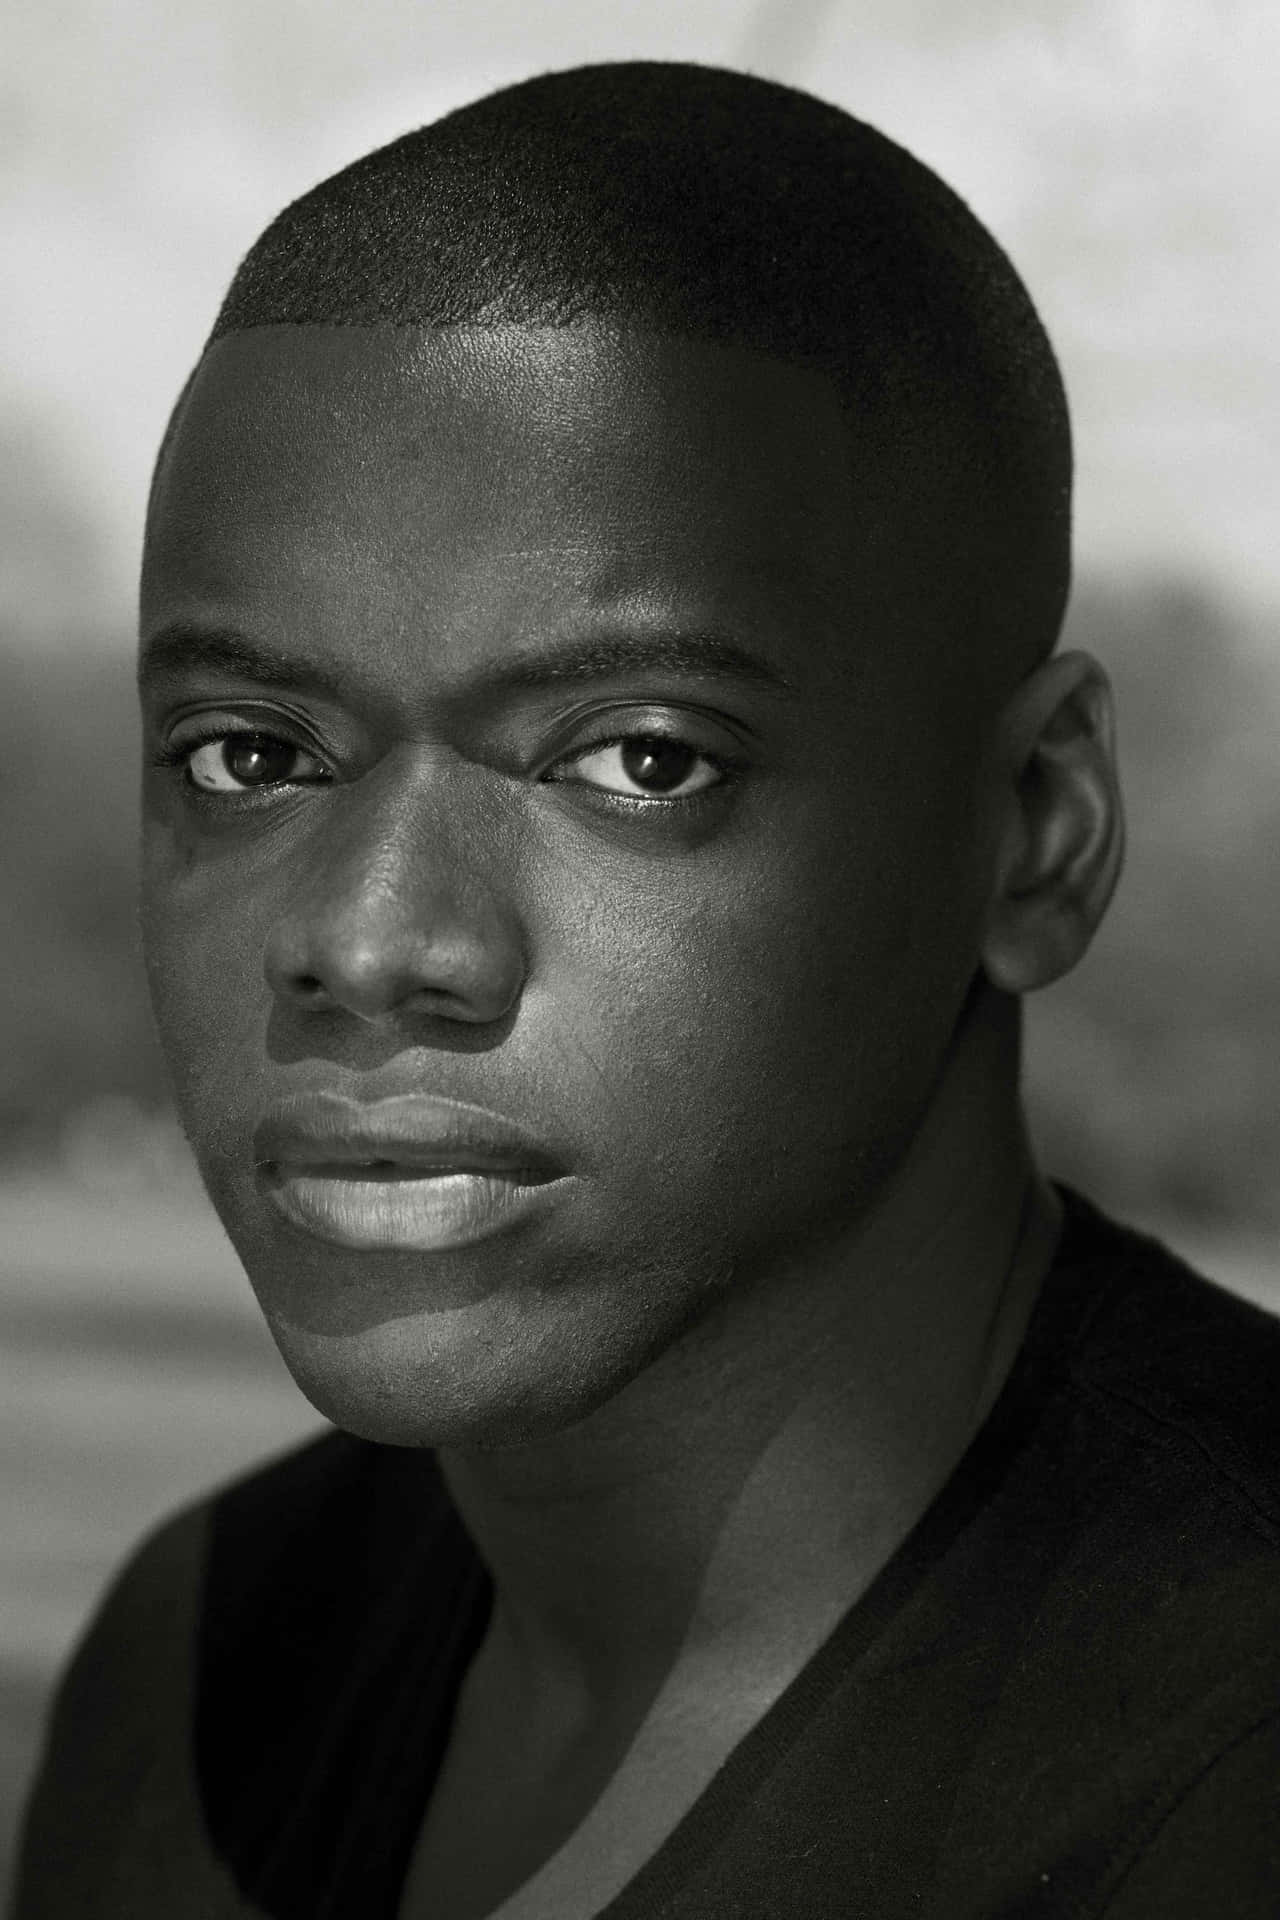 Daniel Kaluuya portraying his Oscar nominated character in the film, "Get Out" Wallpaper